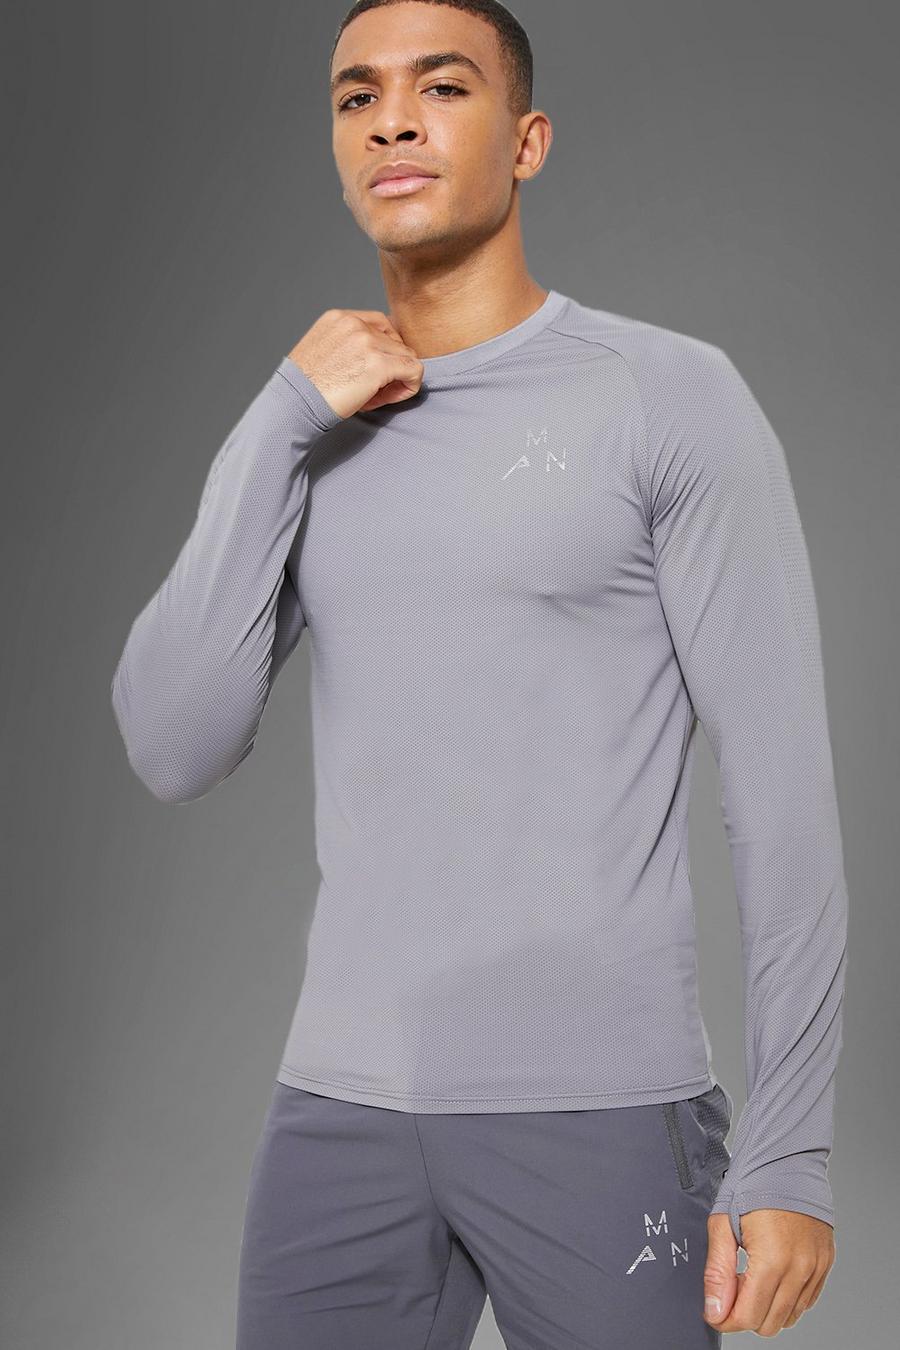 Charcoal gris Active Gym Reflective Panel Long Sleeve Top